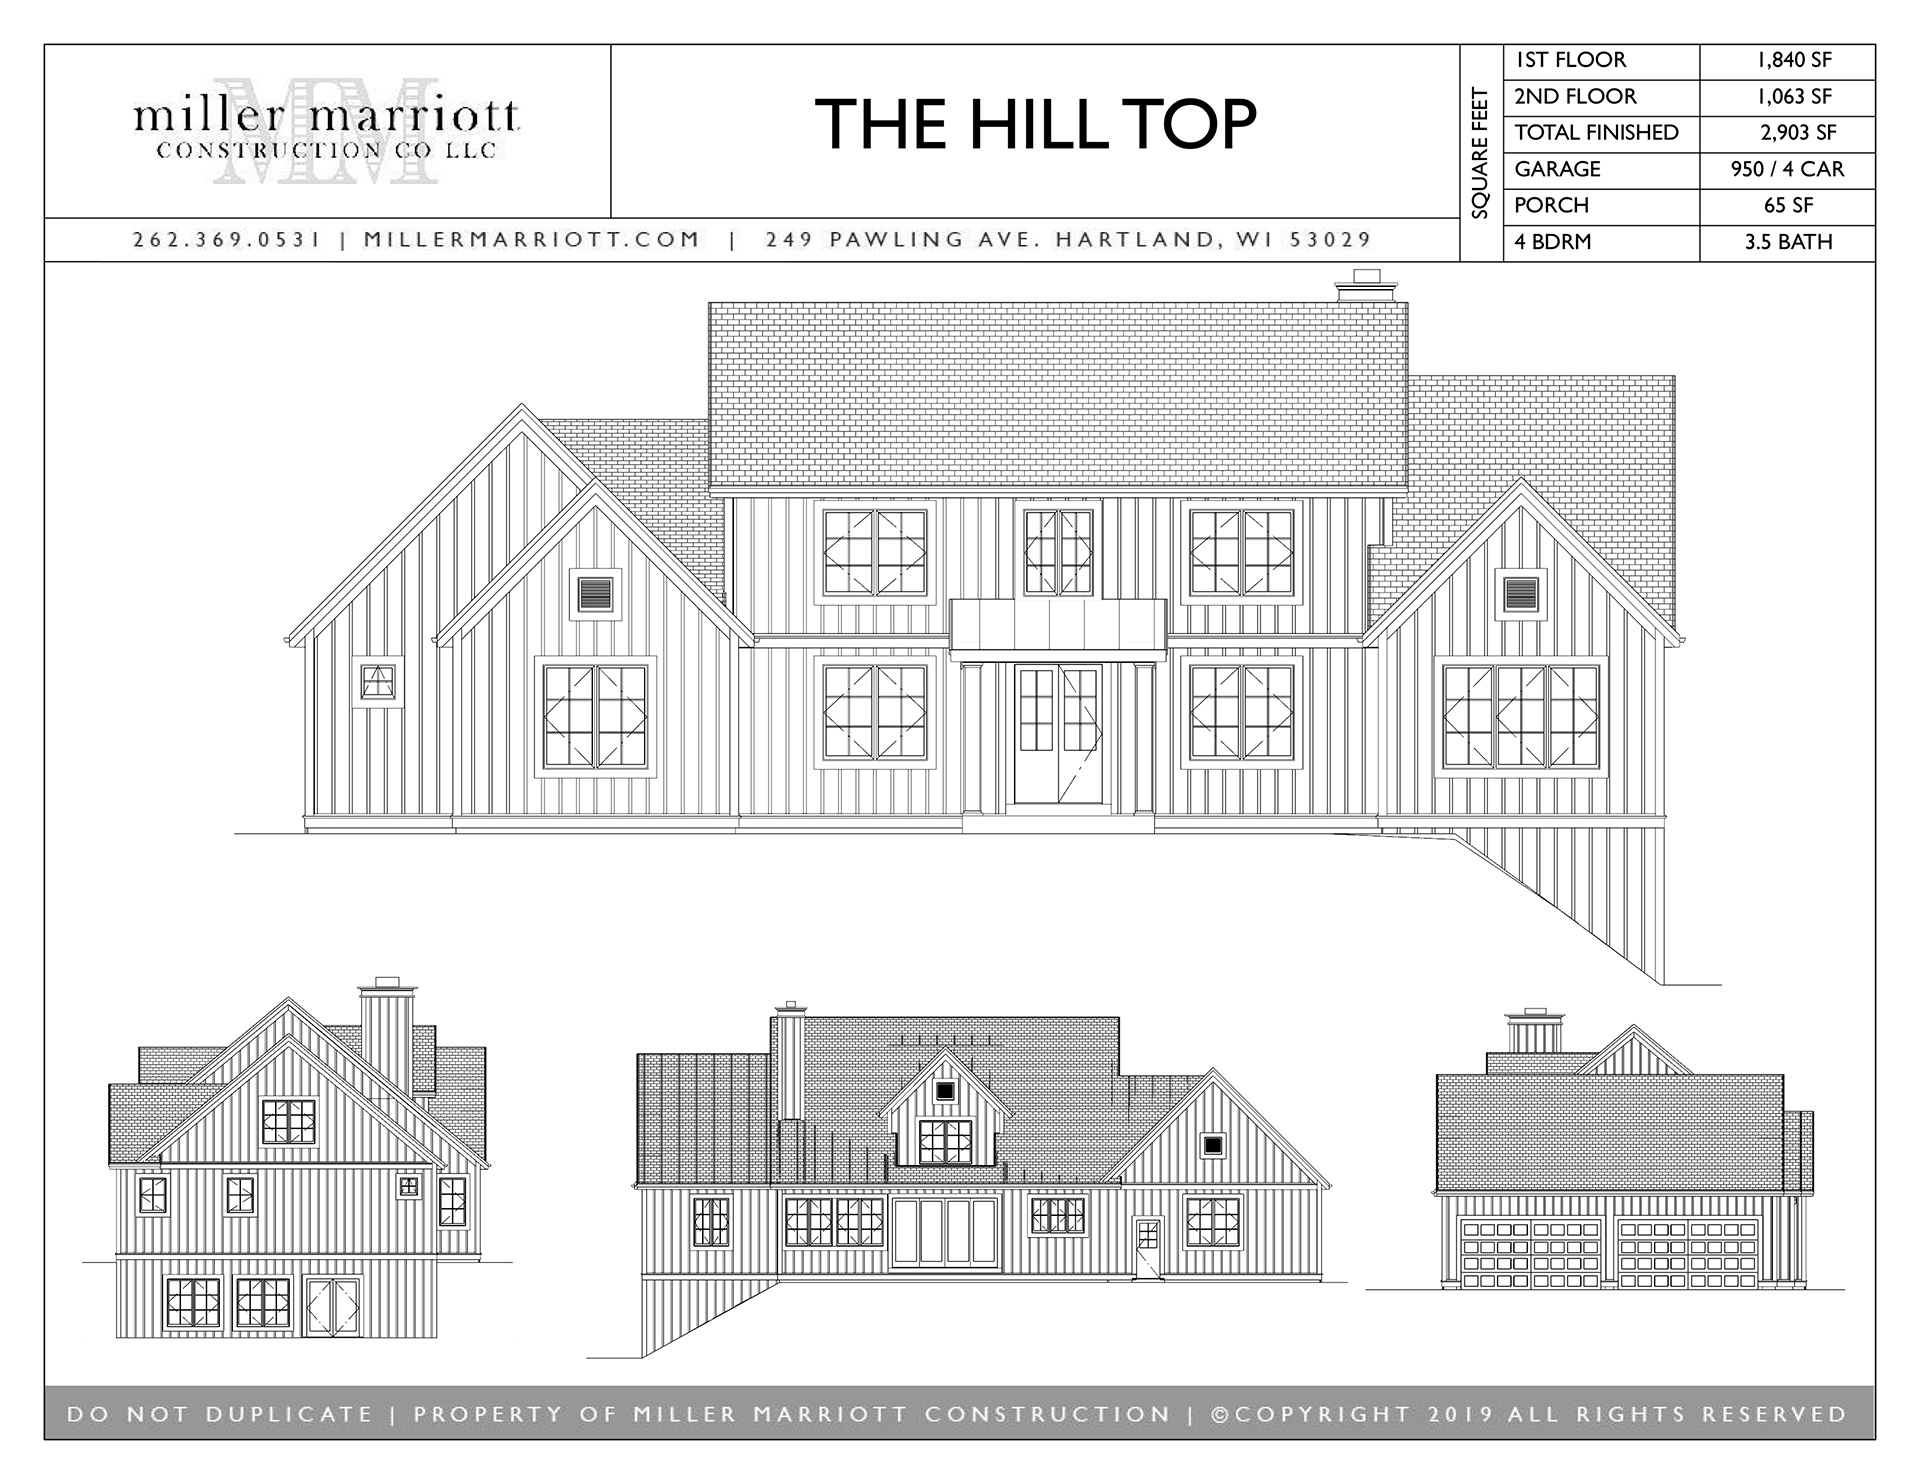 The Hill Top exterior plan